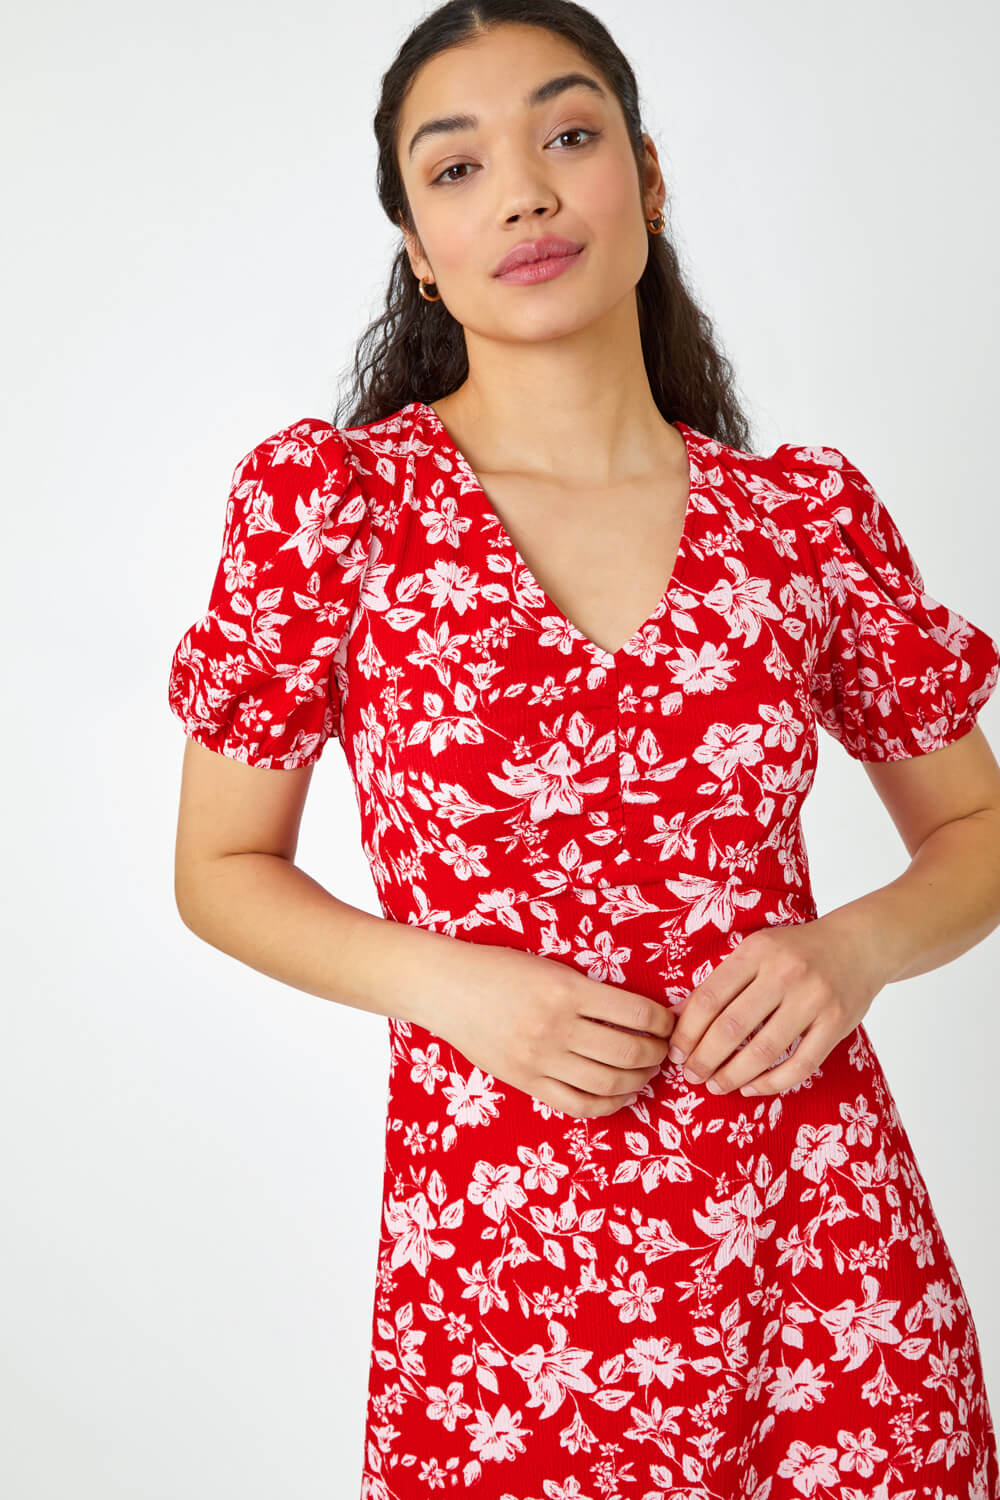 Red Floral Print Lace Back Midi Dress, Image 4 of 5